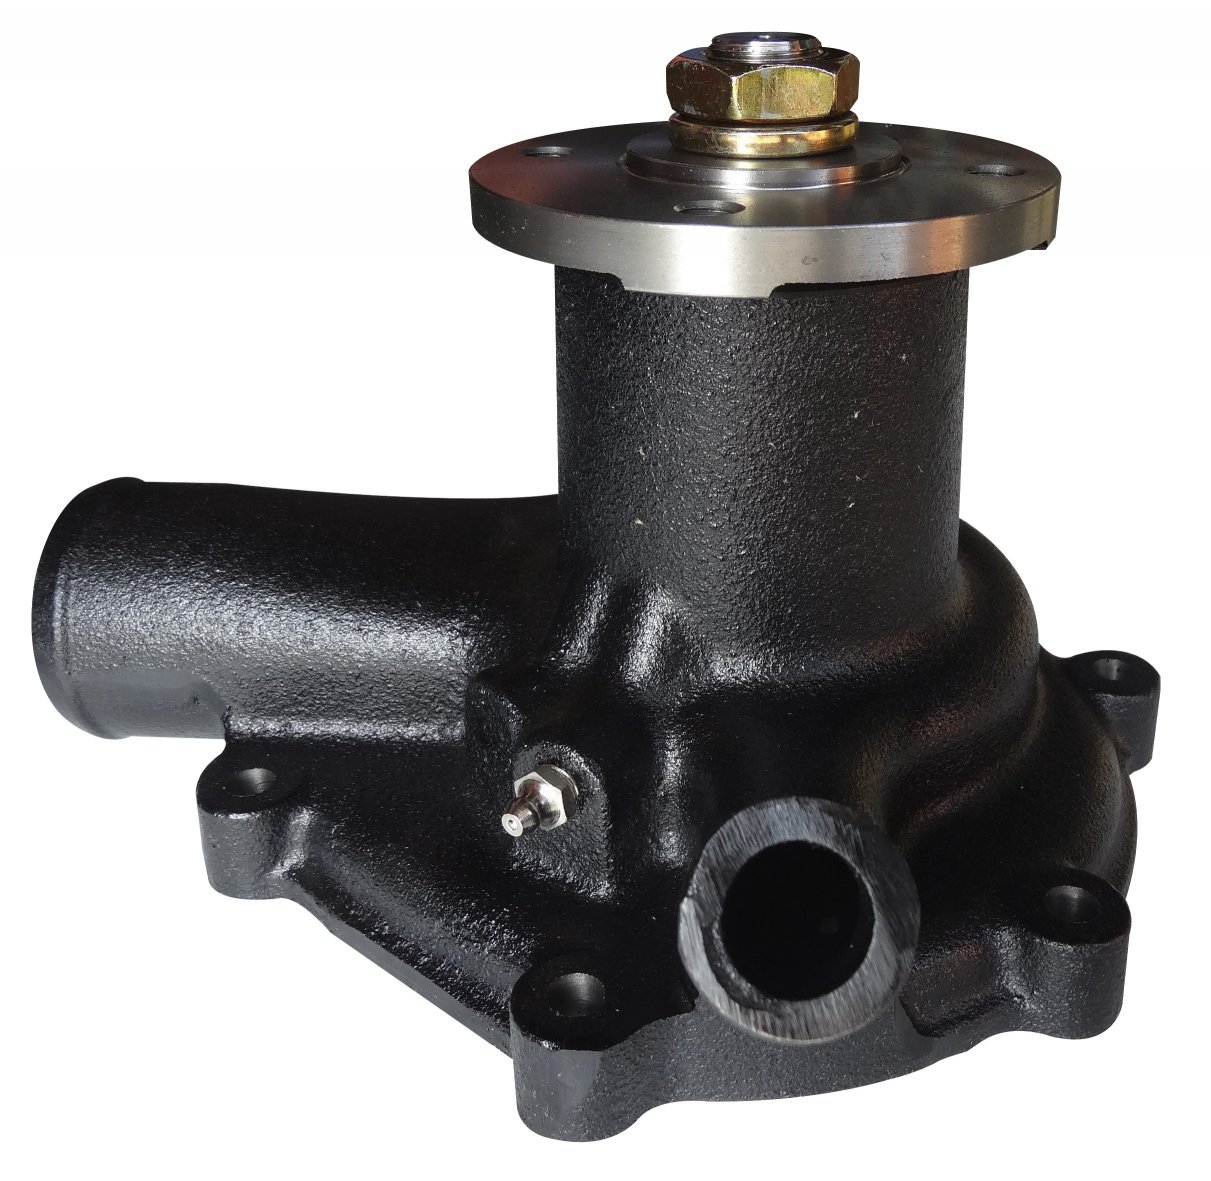 Agricultural / Tractor Water Pumps  for Diesel Engine Parts made by SHIN-LI AUTO PARTS CO., LTD. 　鑫立交通器材製造股份有限公司 - MatchSupplier.com